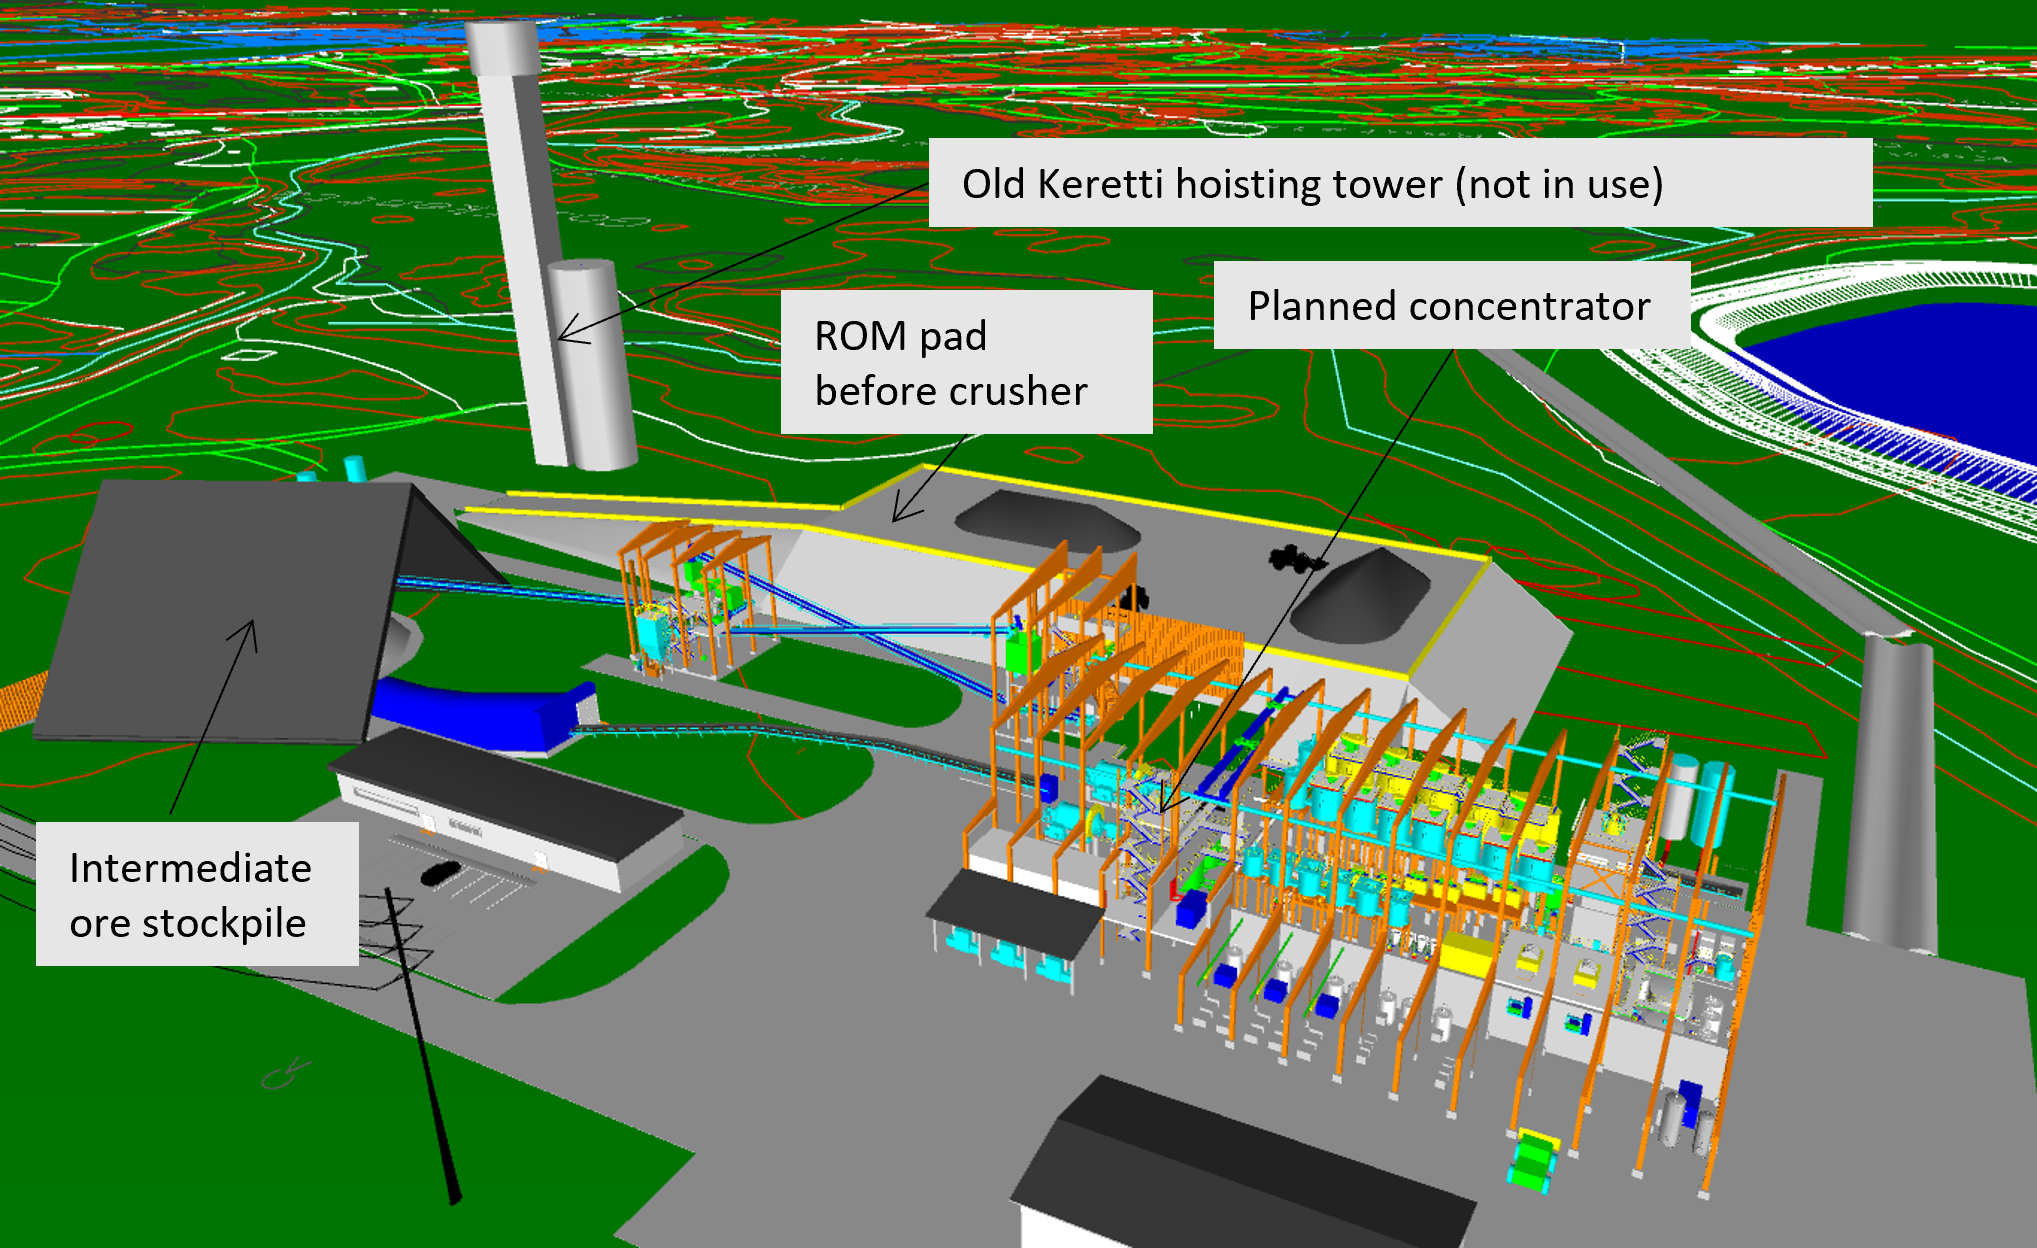 Overview of the processing plant and the concentrator